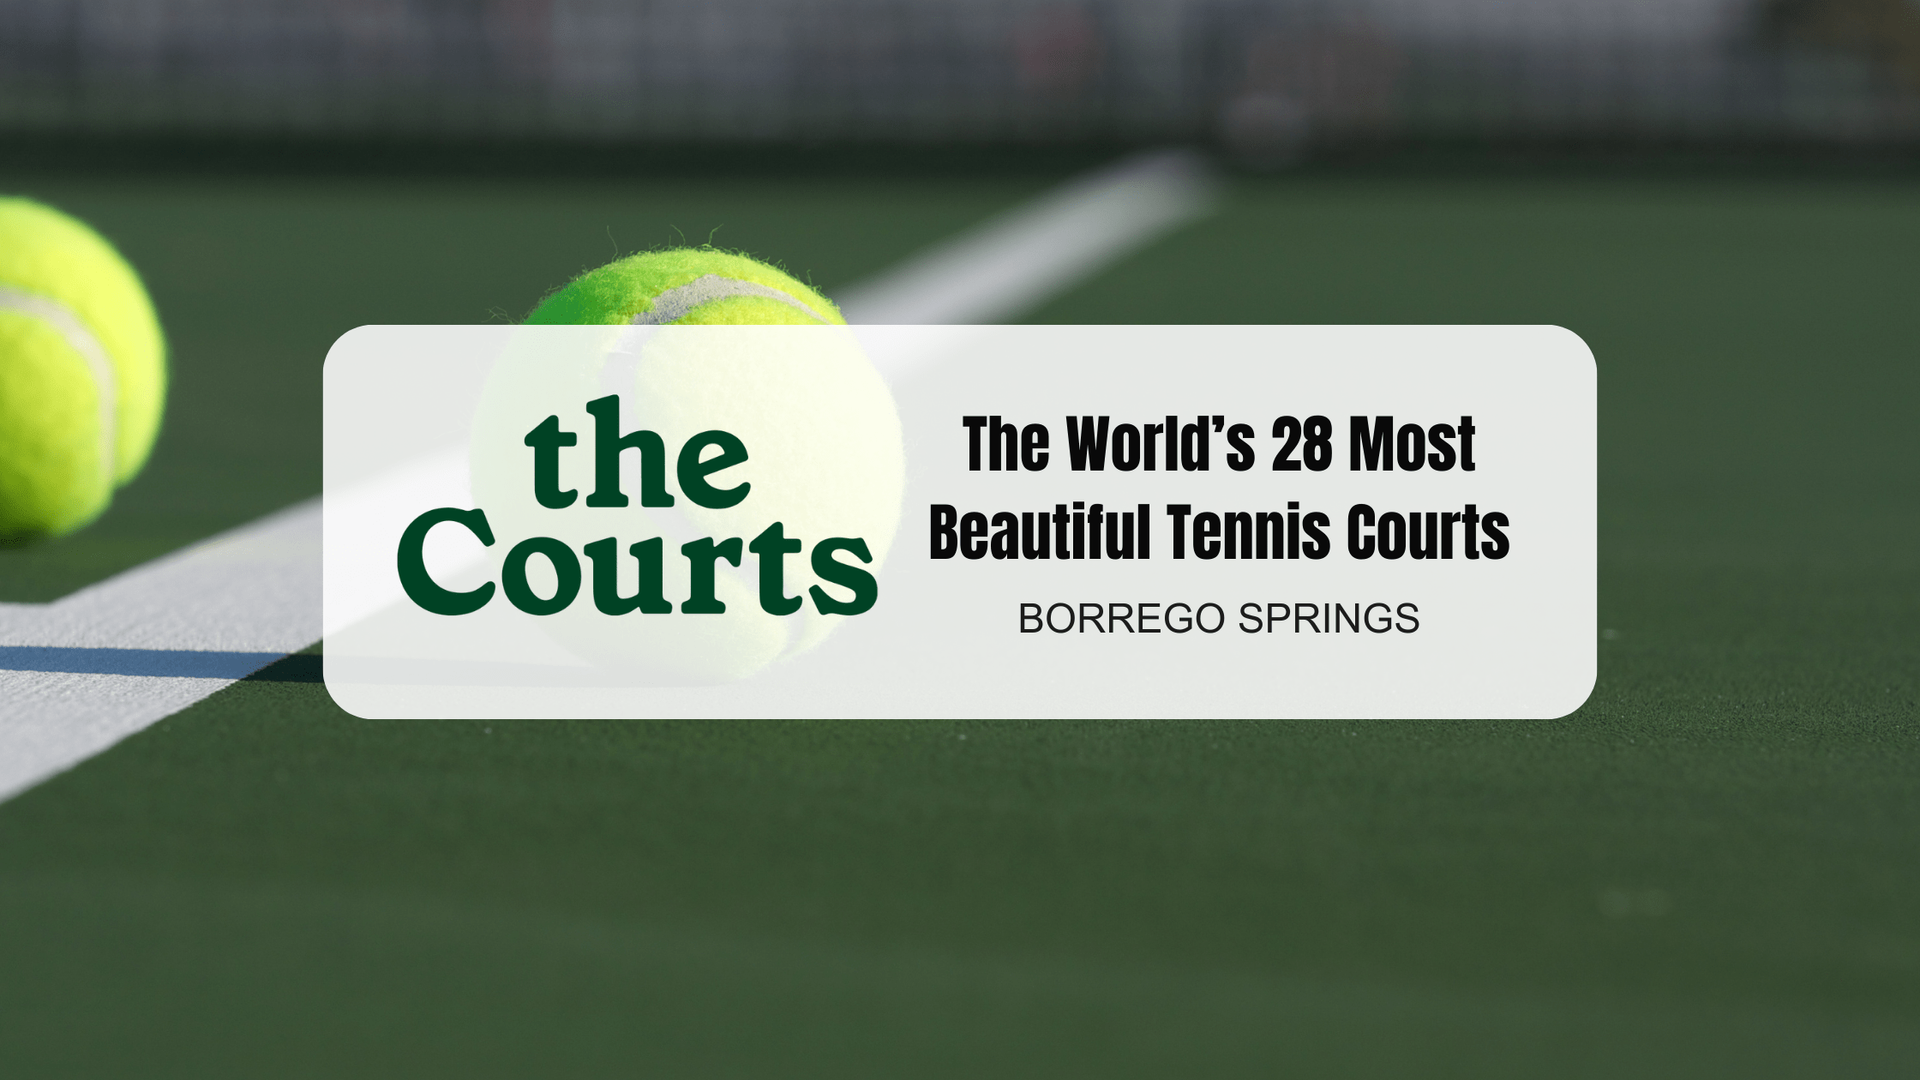 The World’s 28 Most Beautiful Tennis Courts